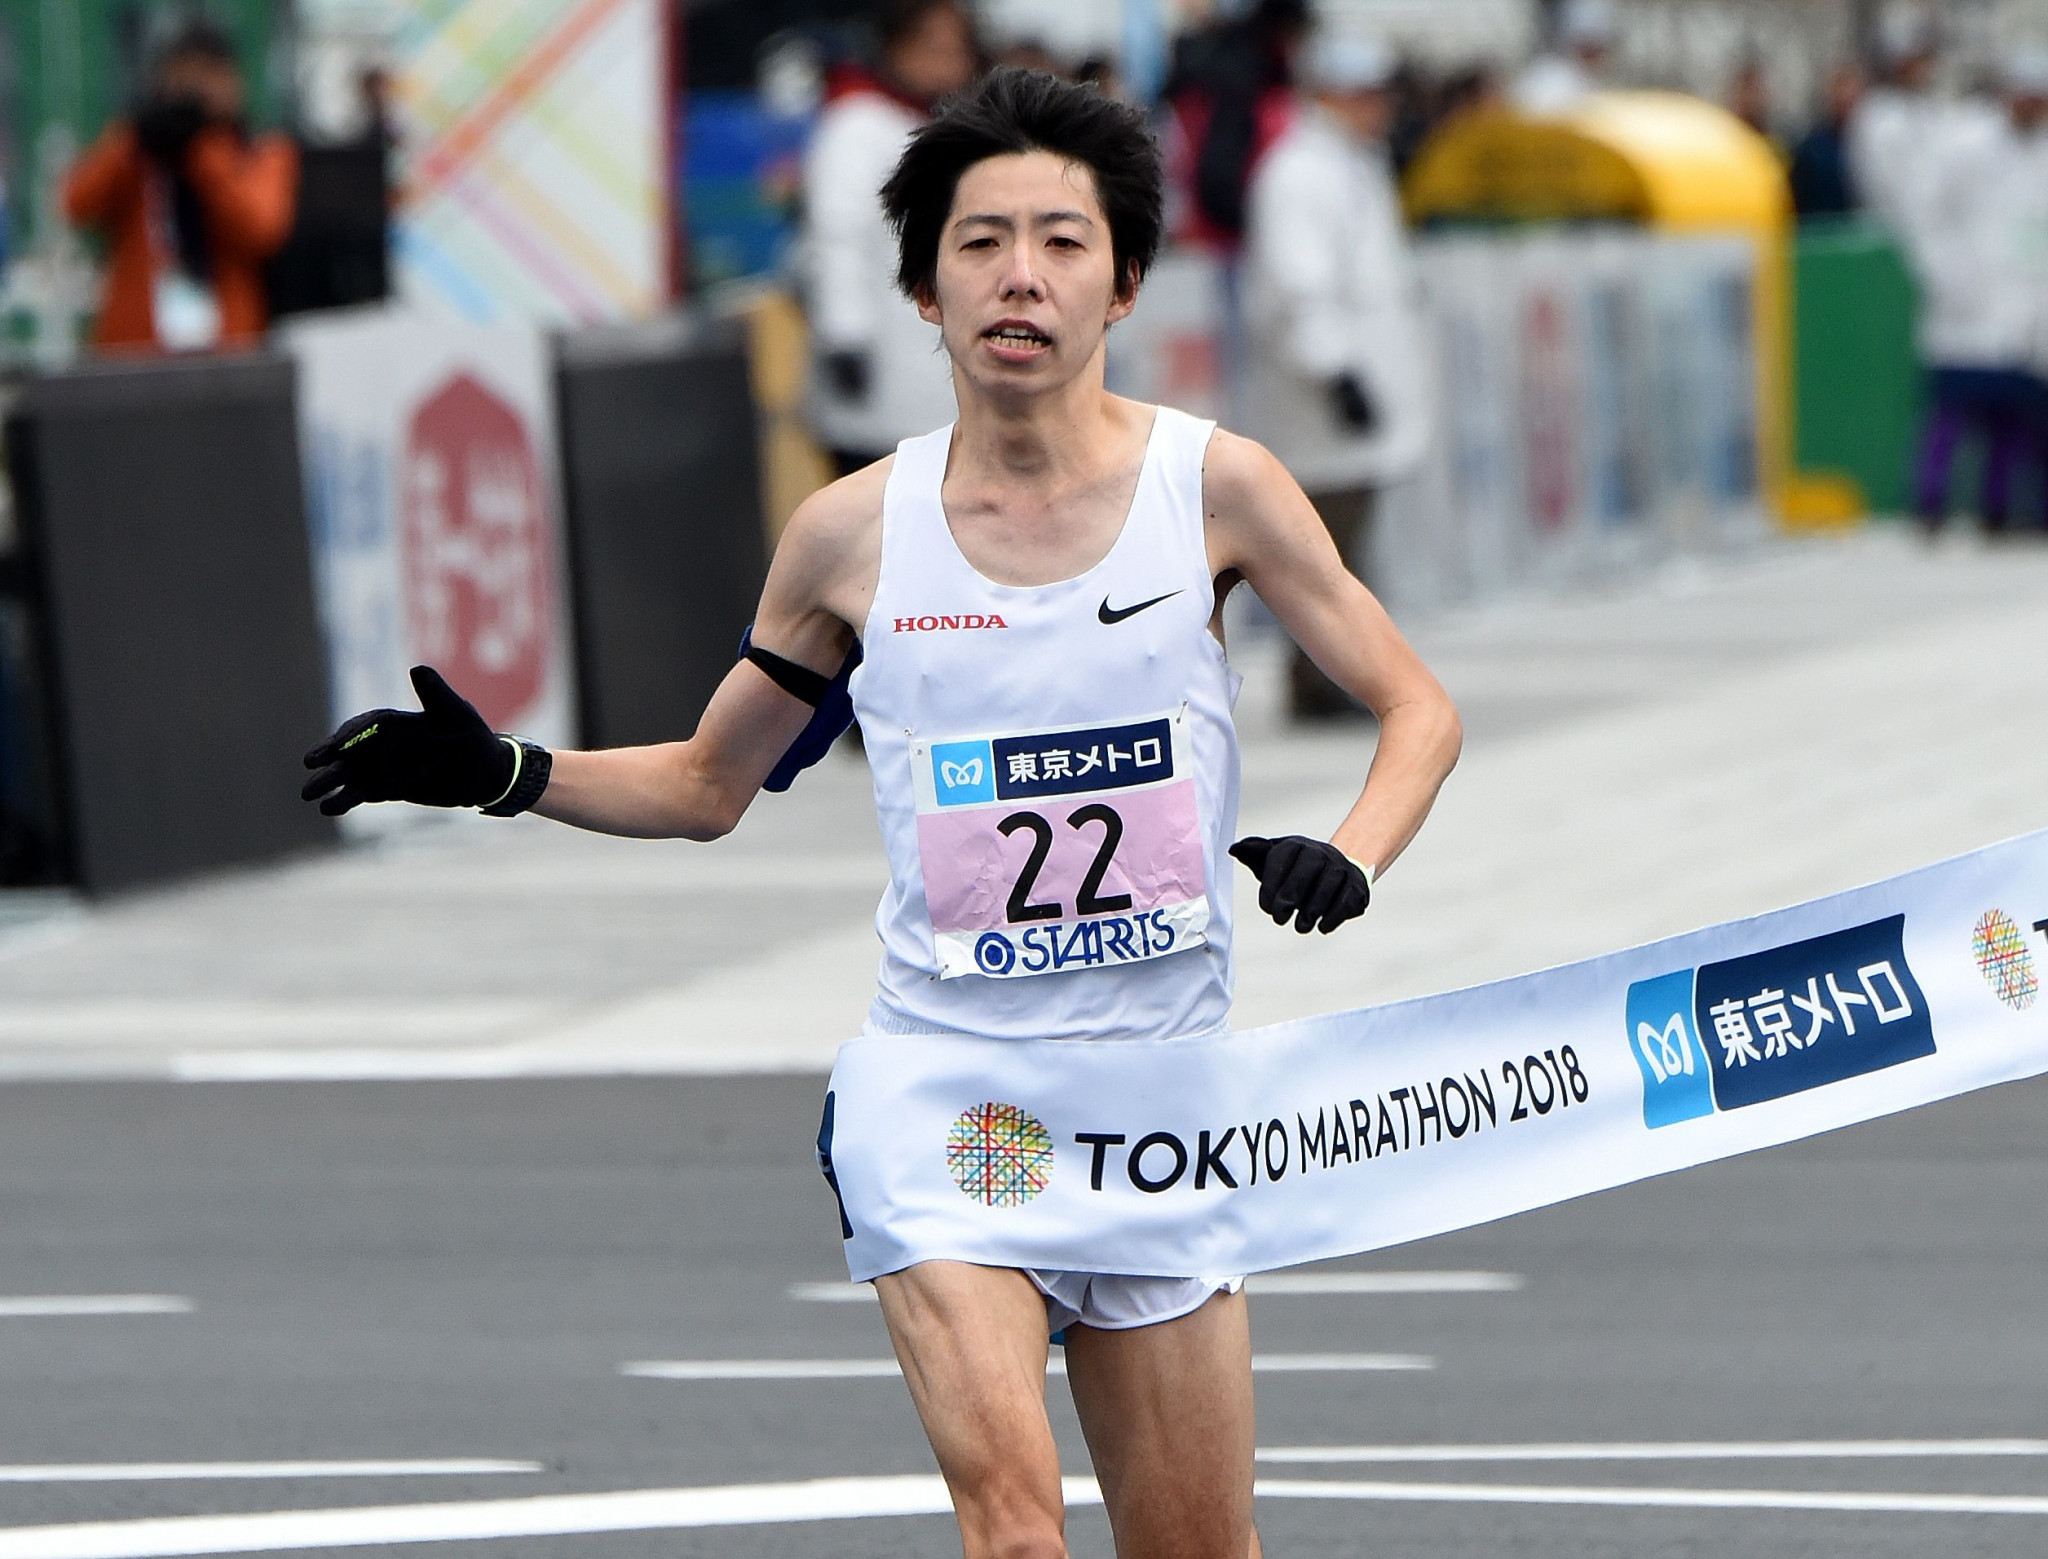 Yuta Shitara will have eyes on an automatic Tokyo 2020 spot ©Getty Images